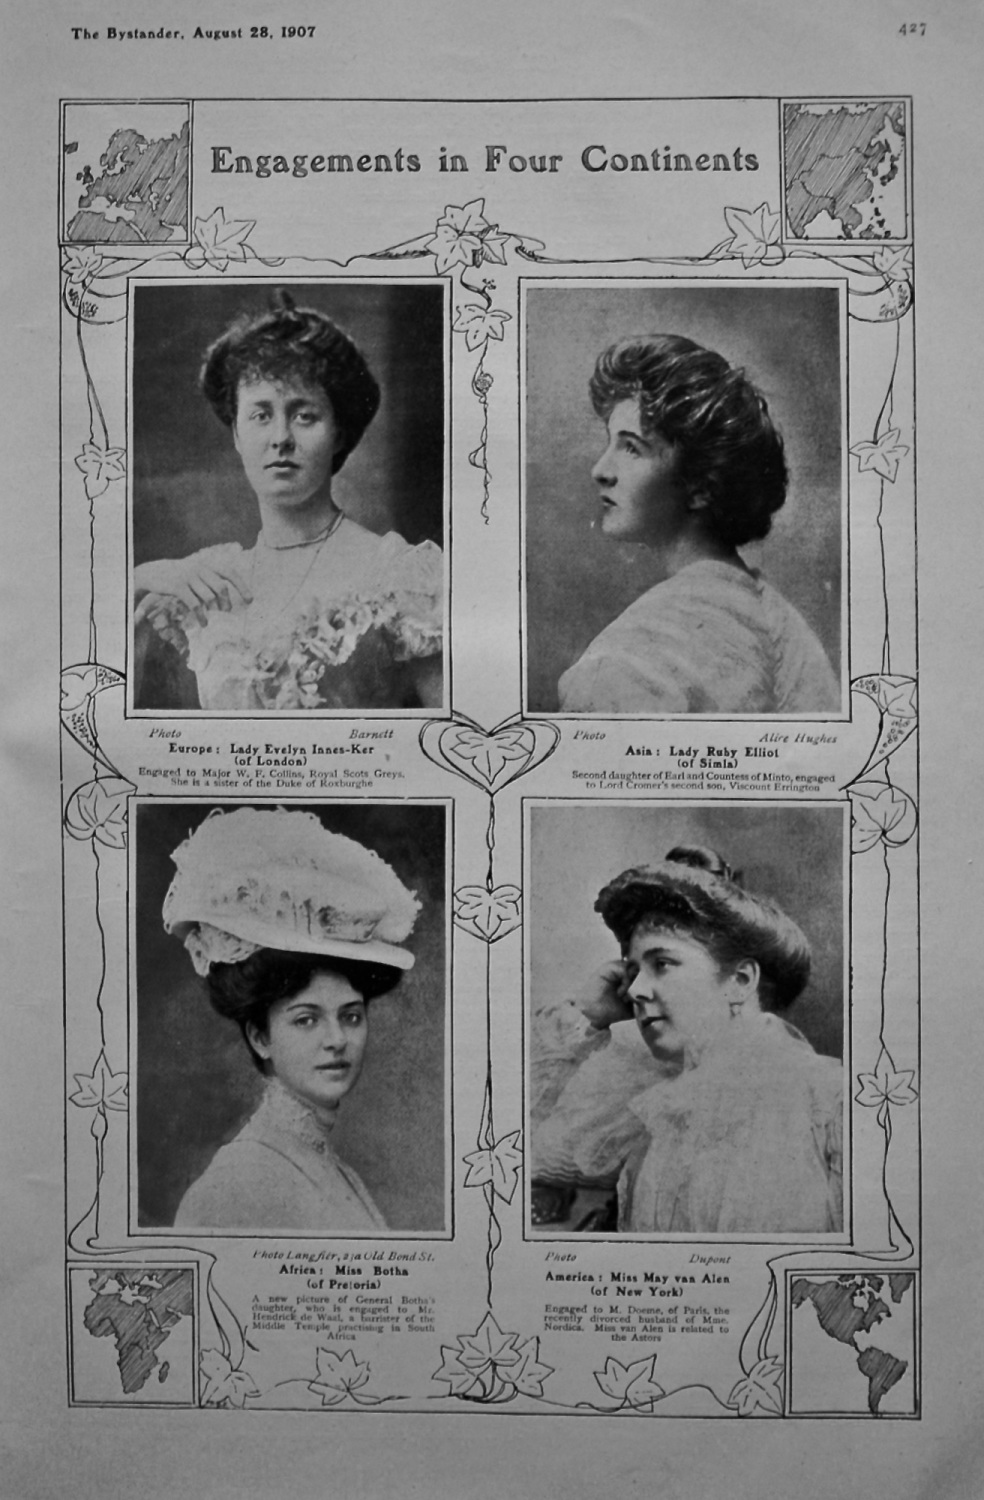 Engagements in Four Continents. 1907.